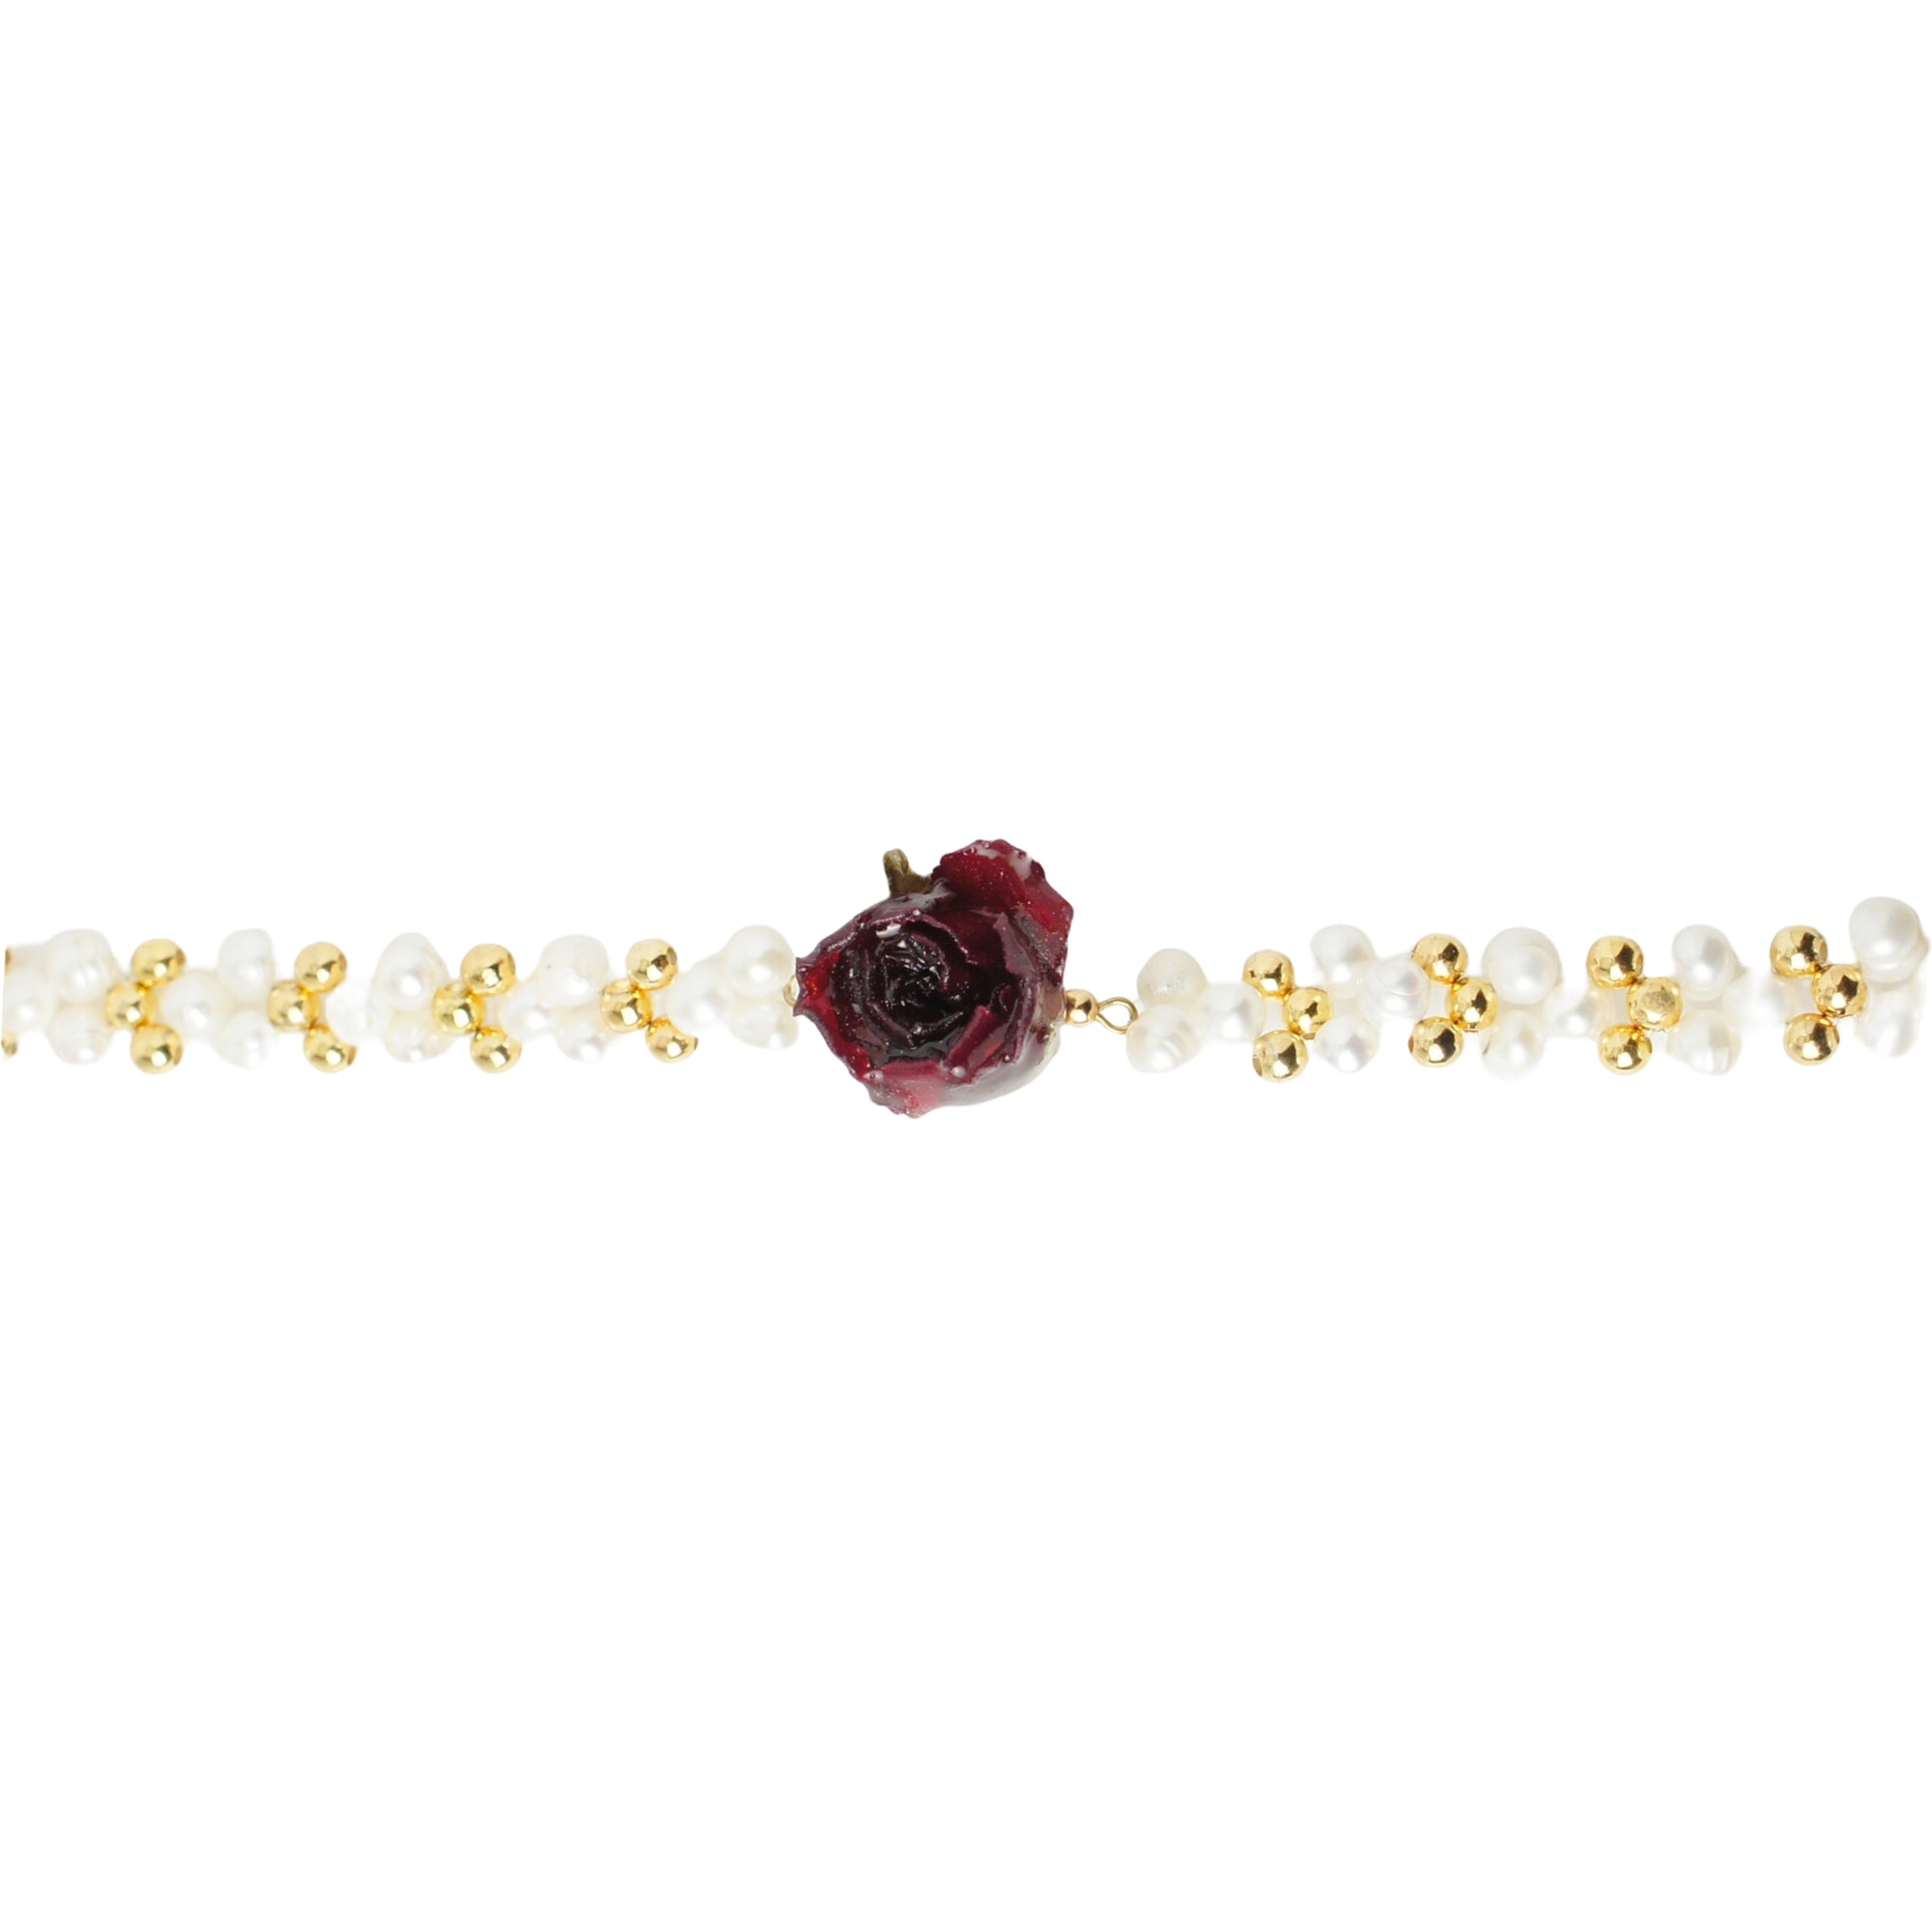 *REAL FLOWER* Grande Amore Braided Freshwater Pearl Choker Necklace with Red Rosebud